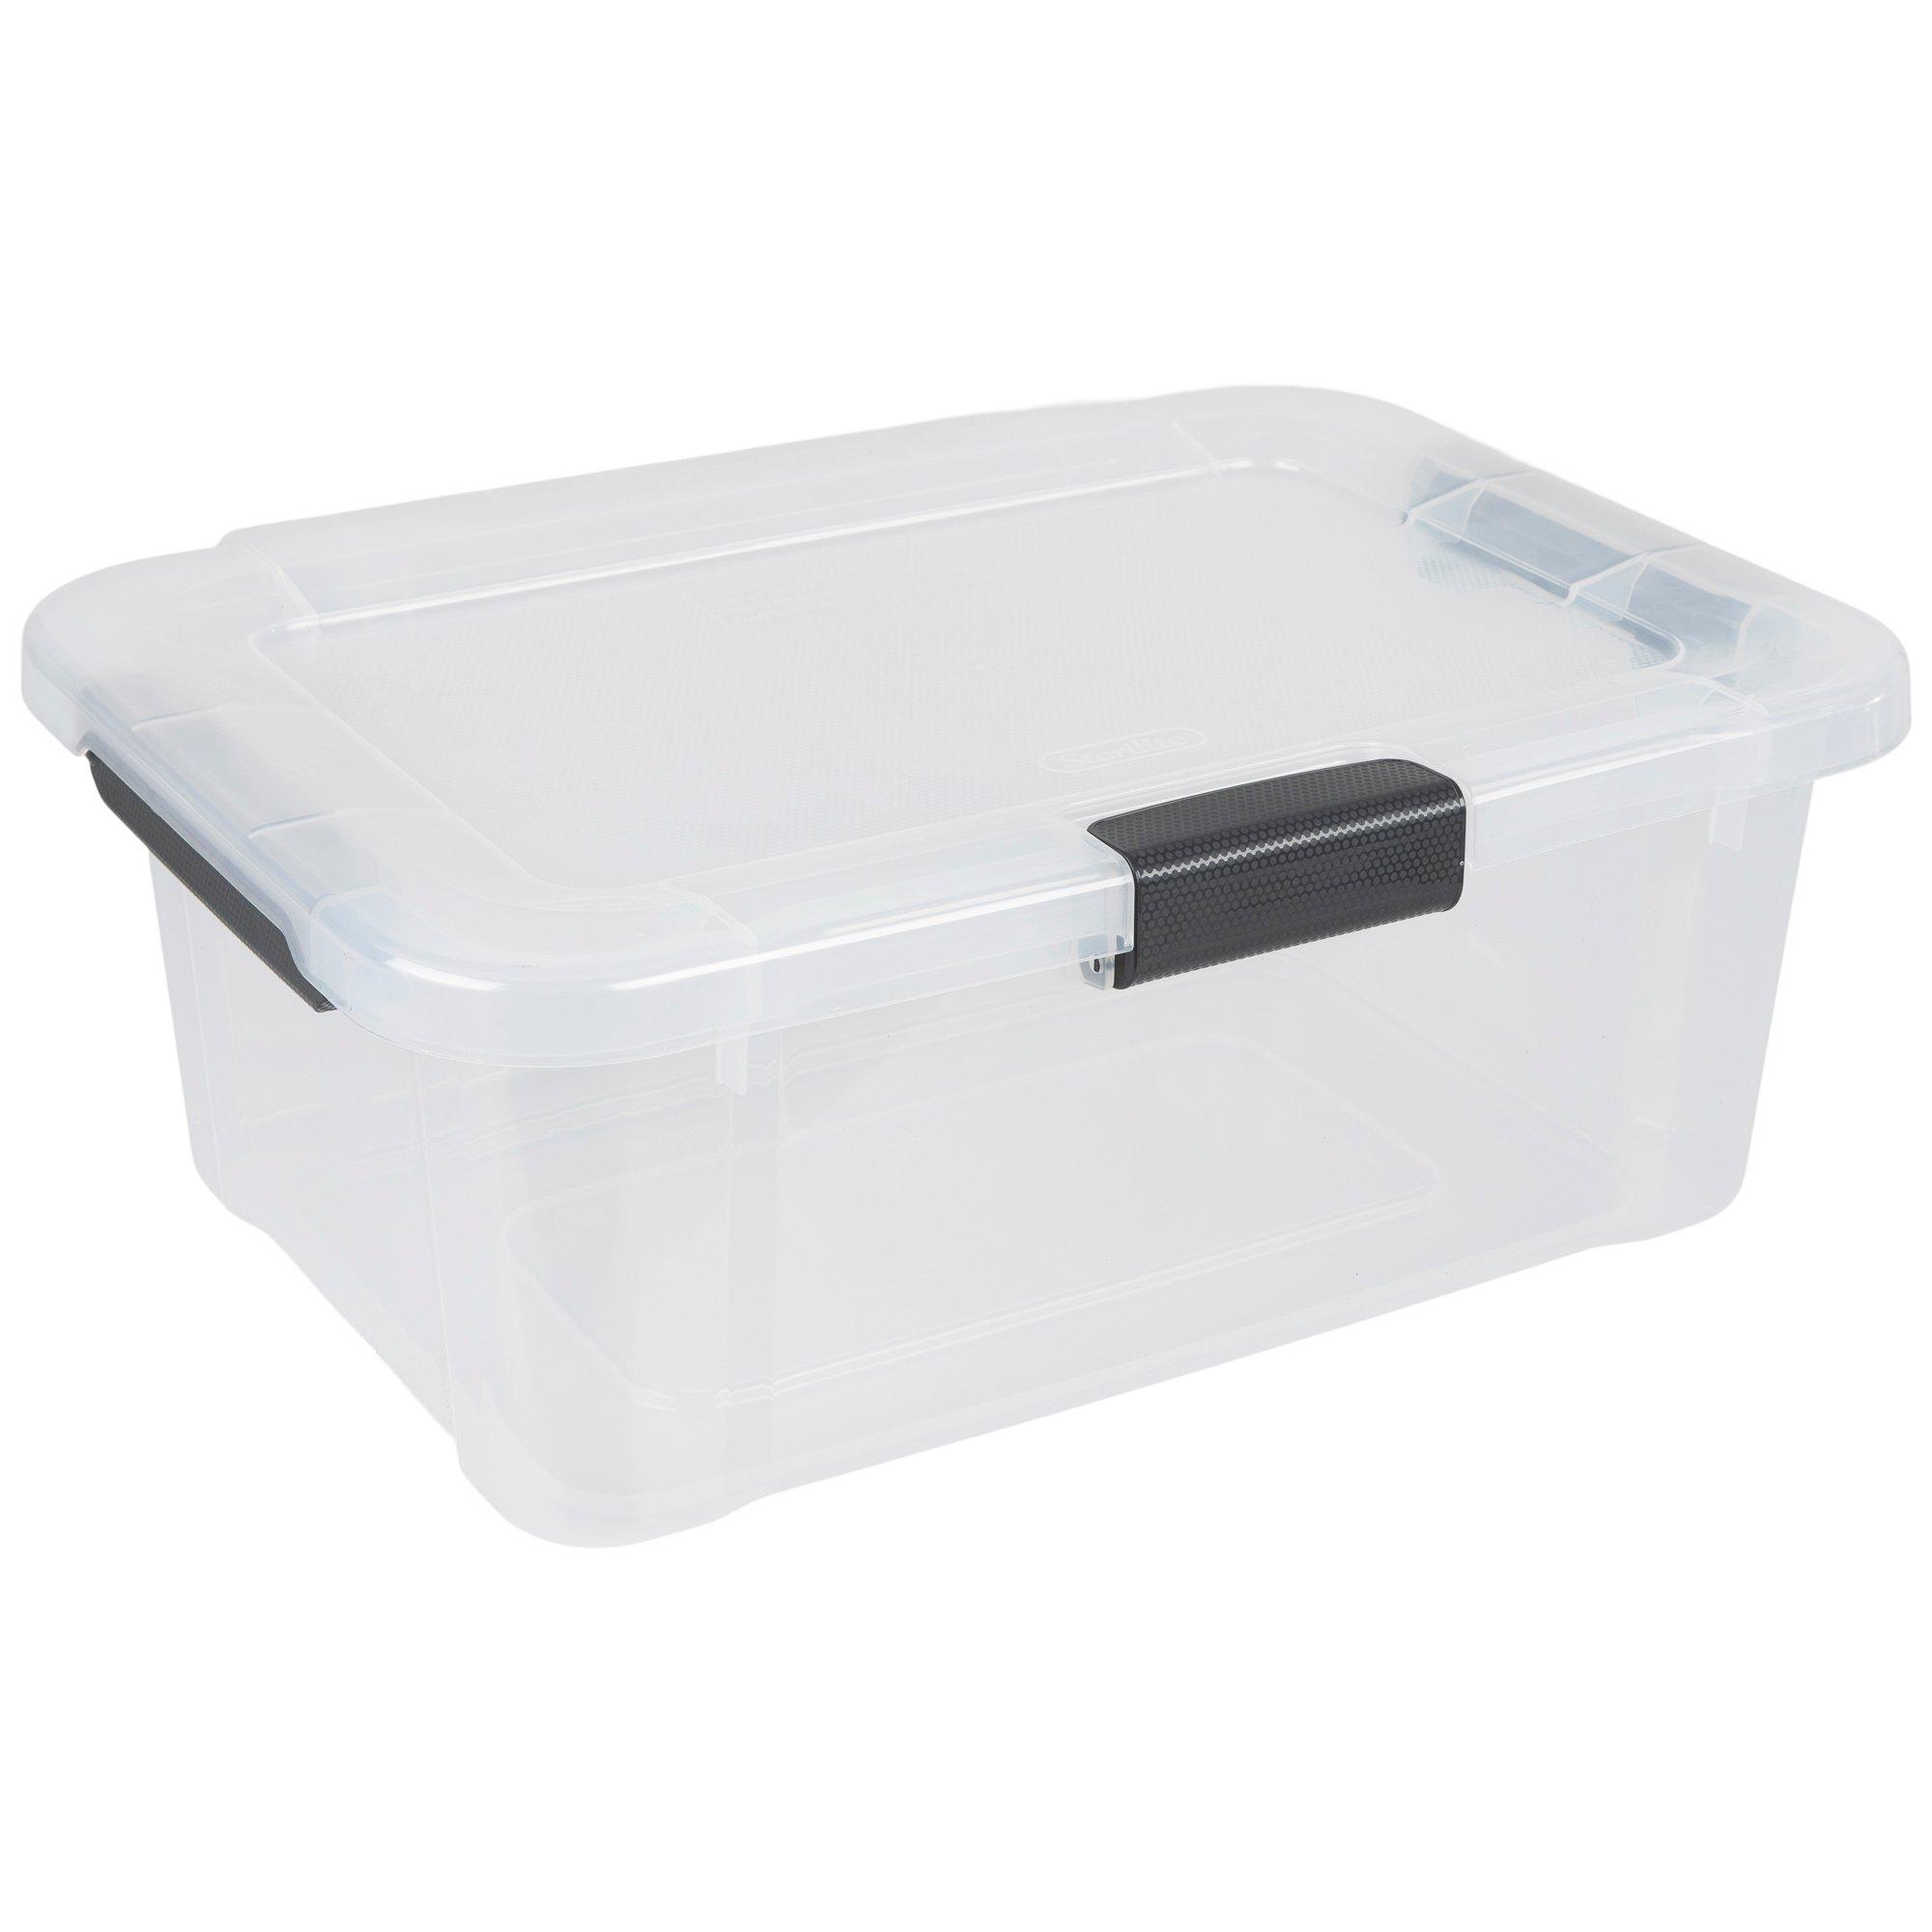 CX CRAFTSMAN, 20-Gallon Highly Durable Storage Bin & Dual Latching Lid,  (14.3”H x 19.7”W x 28.2”D), Versatile Stacking Tote and Weather-Resistant